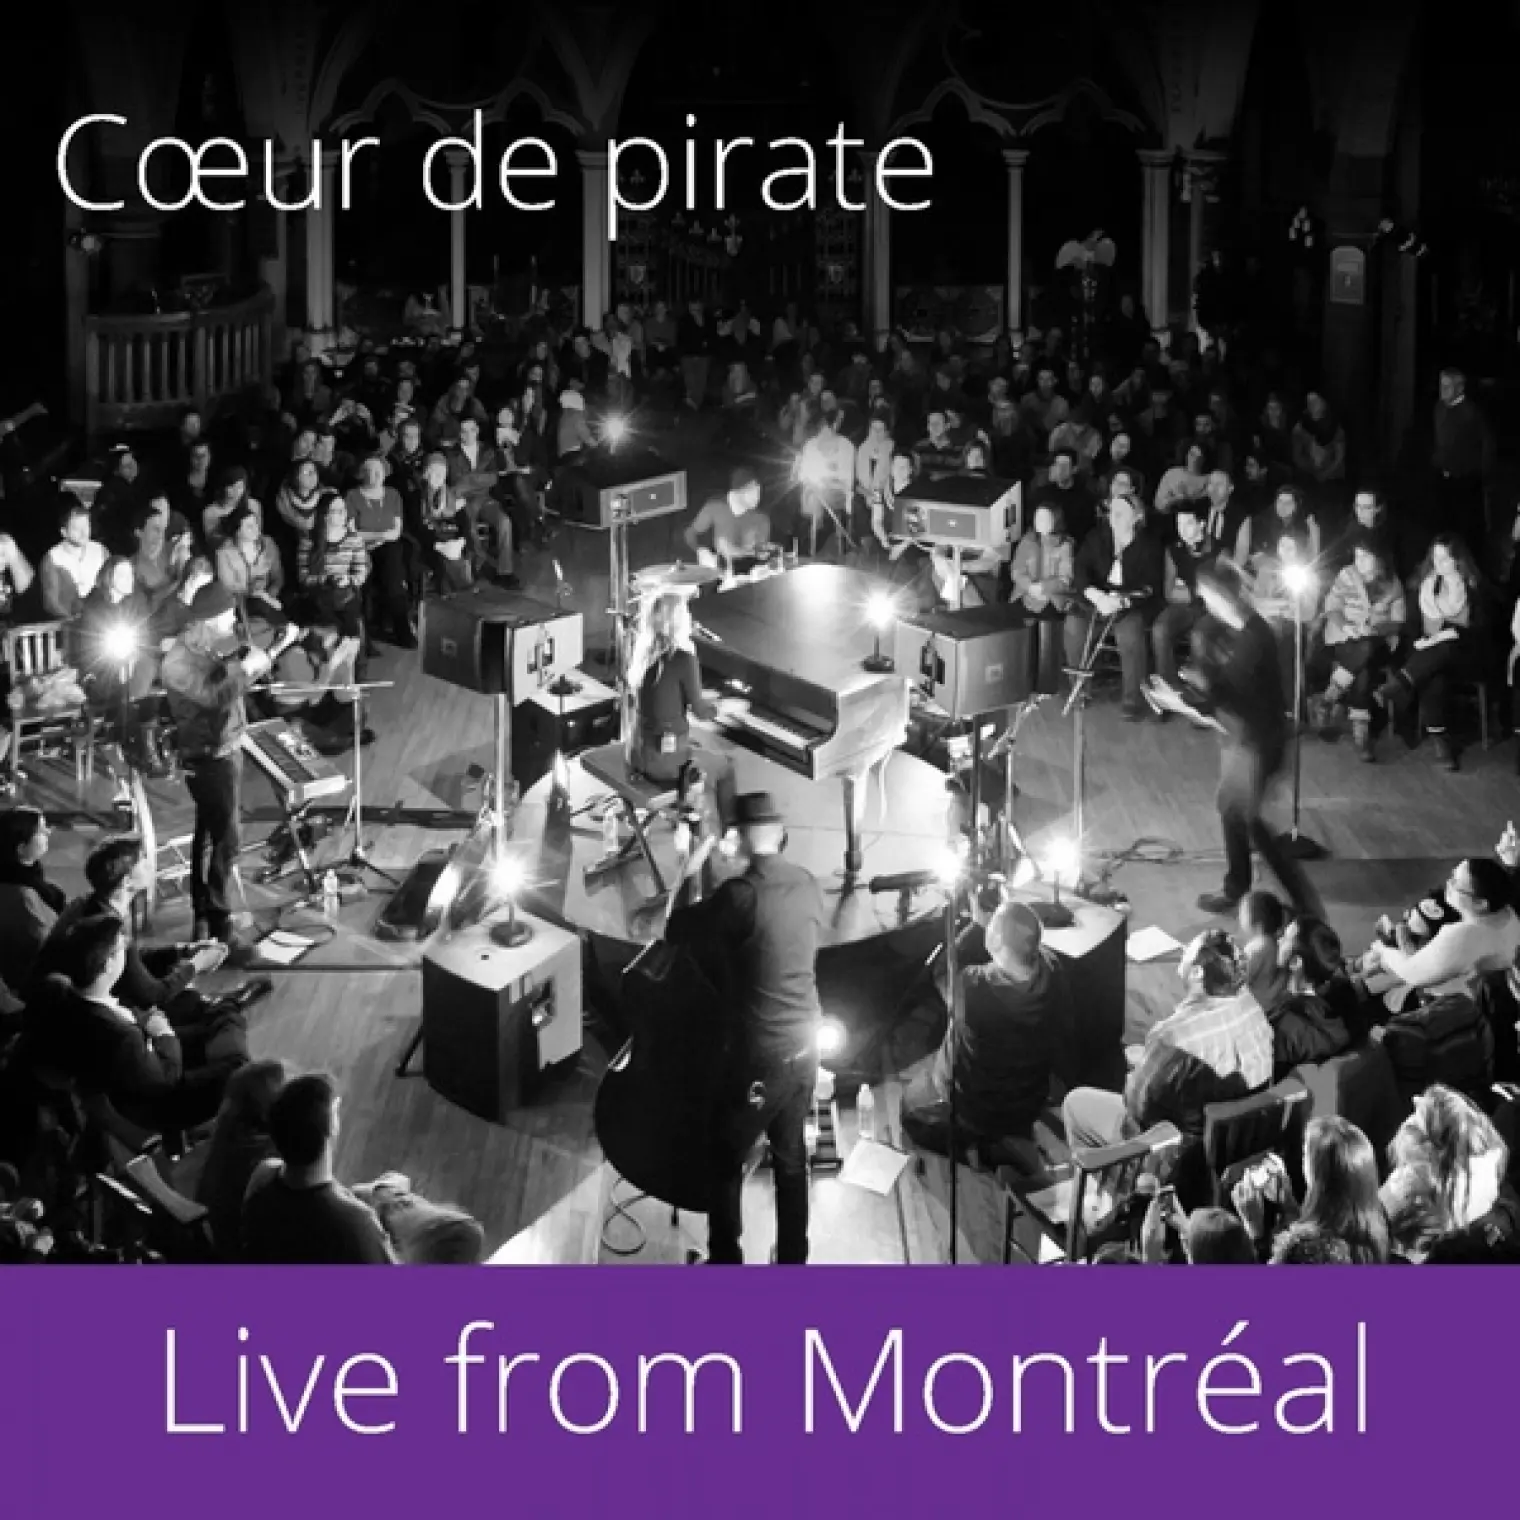 Live from Montréal (Google Play - Home for the Holidays) -  Coeur De Pirate 